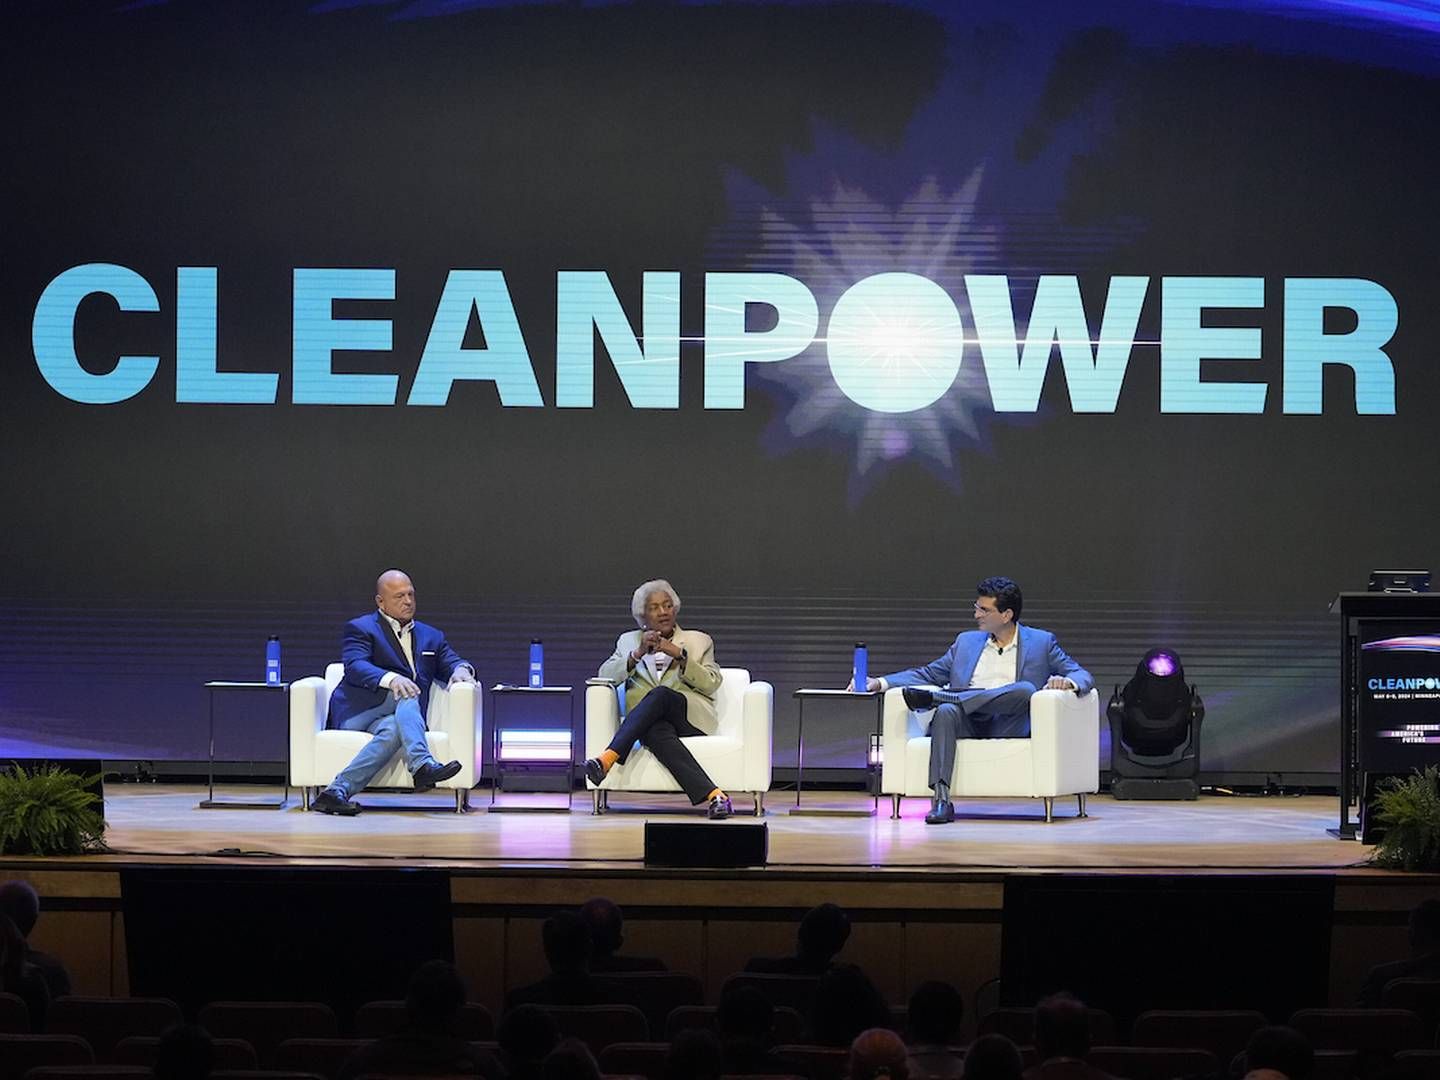 The opening debate at the Cleanpower 2024 conference, featuring former DNC chair Donna Brazile and former Trump advisor David Urban. | Photo: American Clean Power